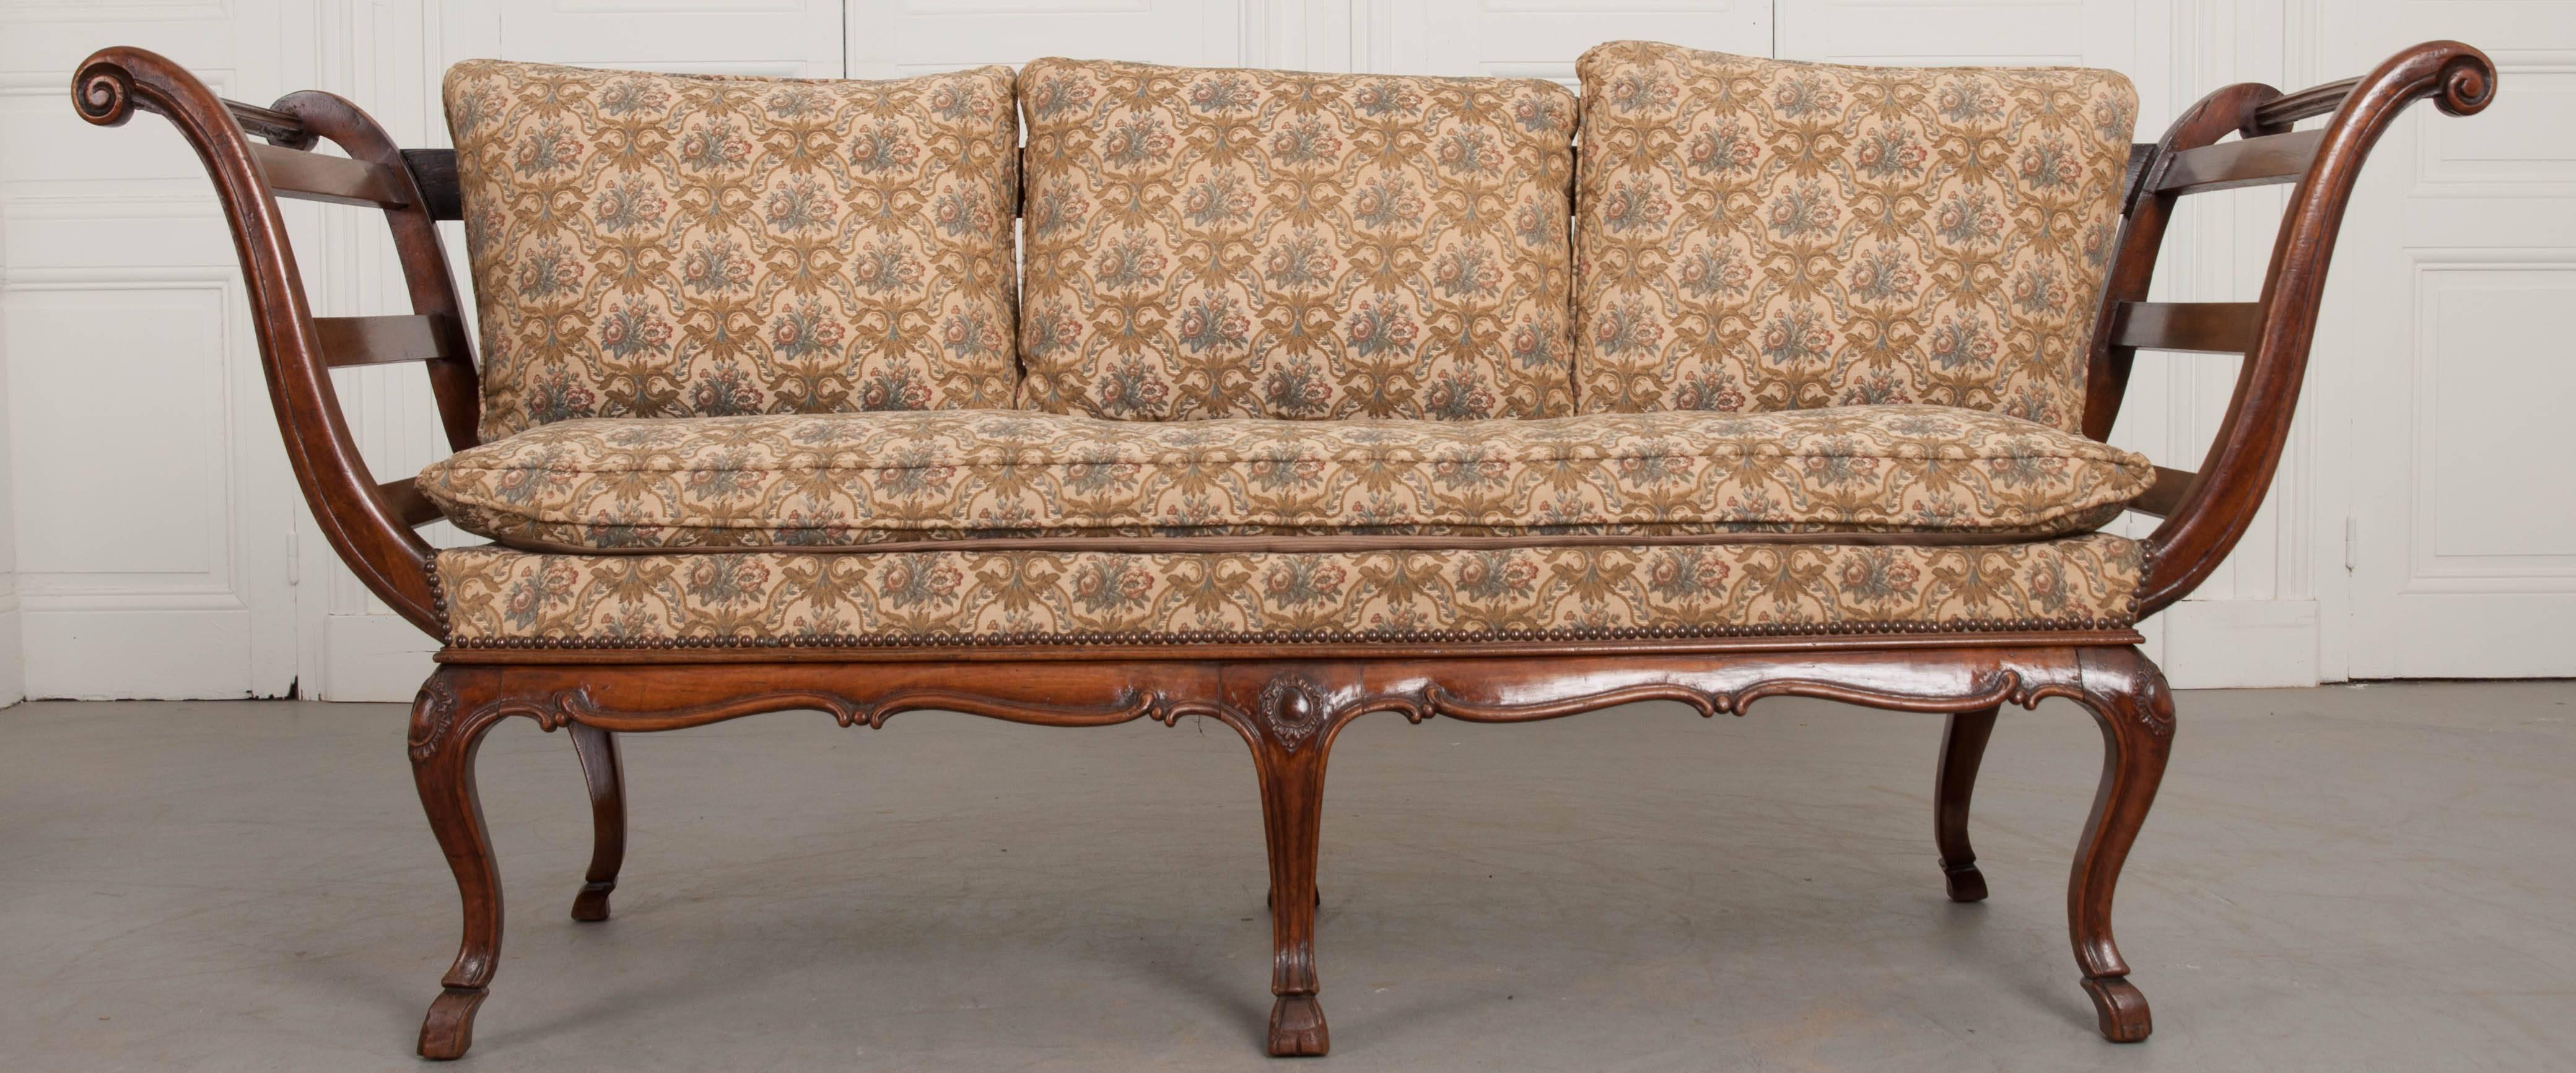 An outstanding Louis XV style settee, totally hand-carved in walnut, from the 18th century, Italy. The upholstered settee has fantastic, scrolled arms that instantly grab your attention. The sides and back of the sofa are open, with carved walnut